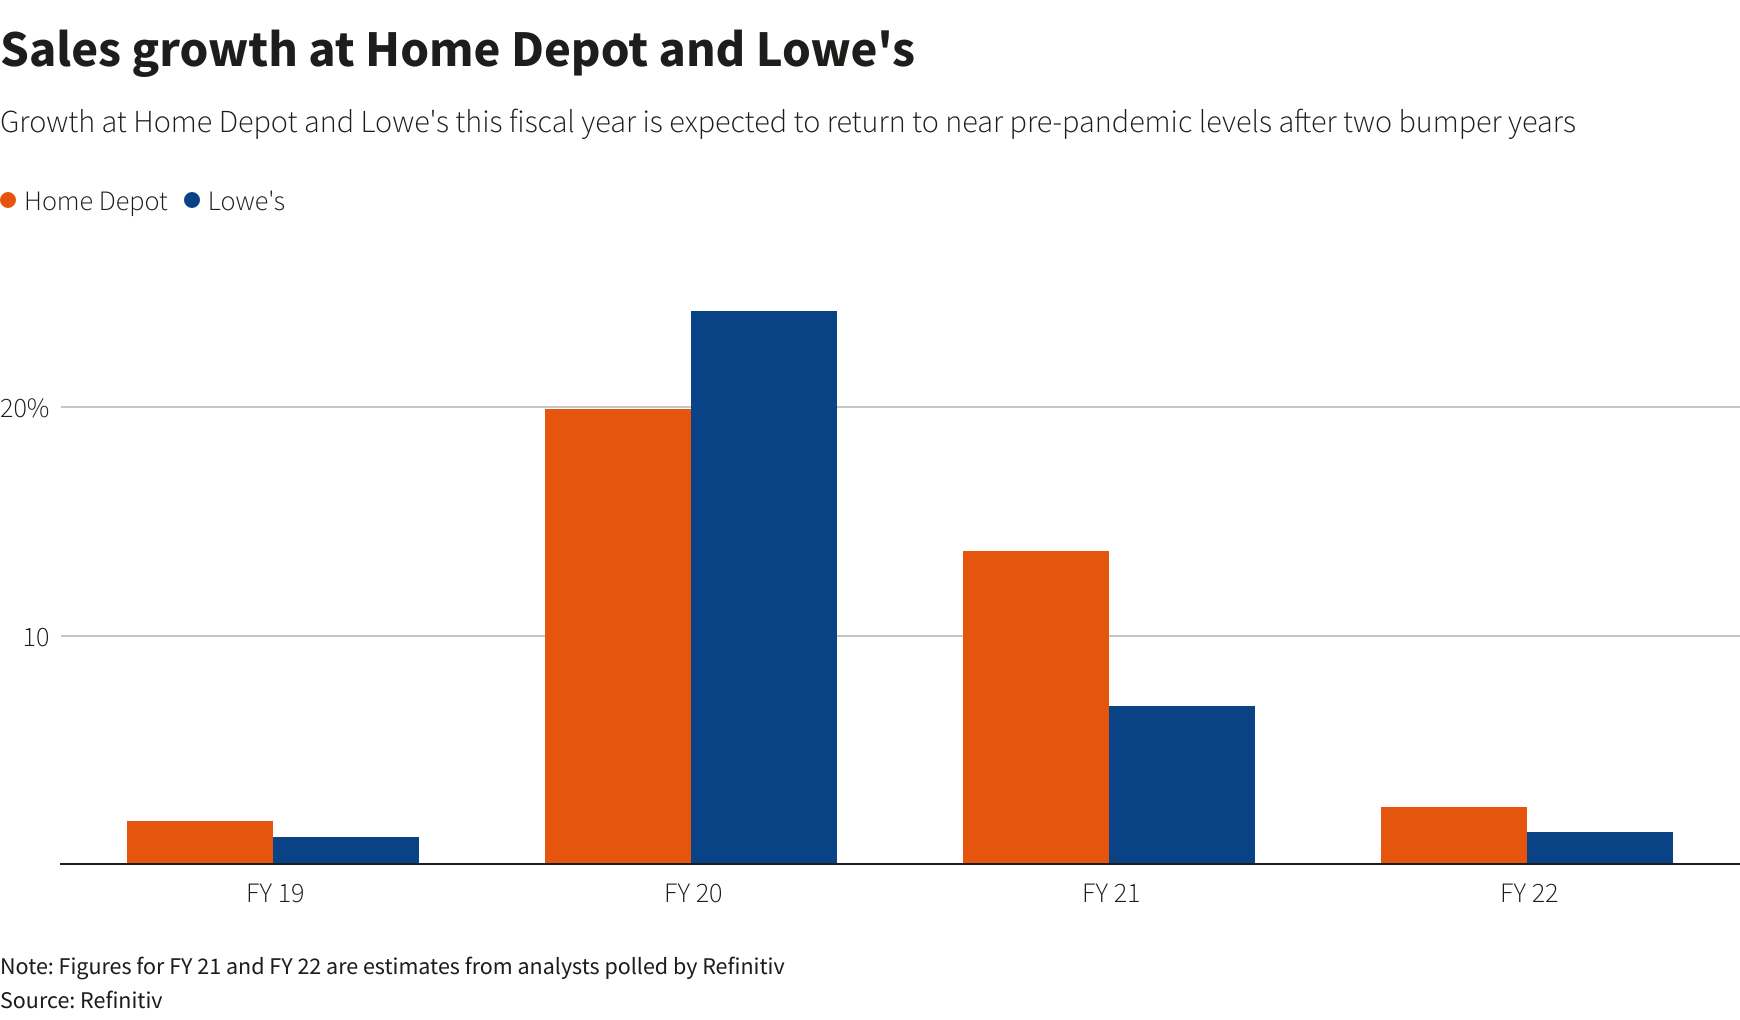 Sales growth at Home Depot and Lowe's